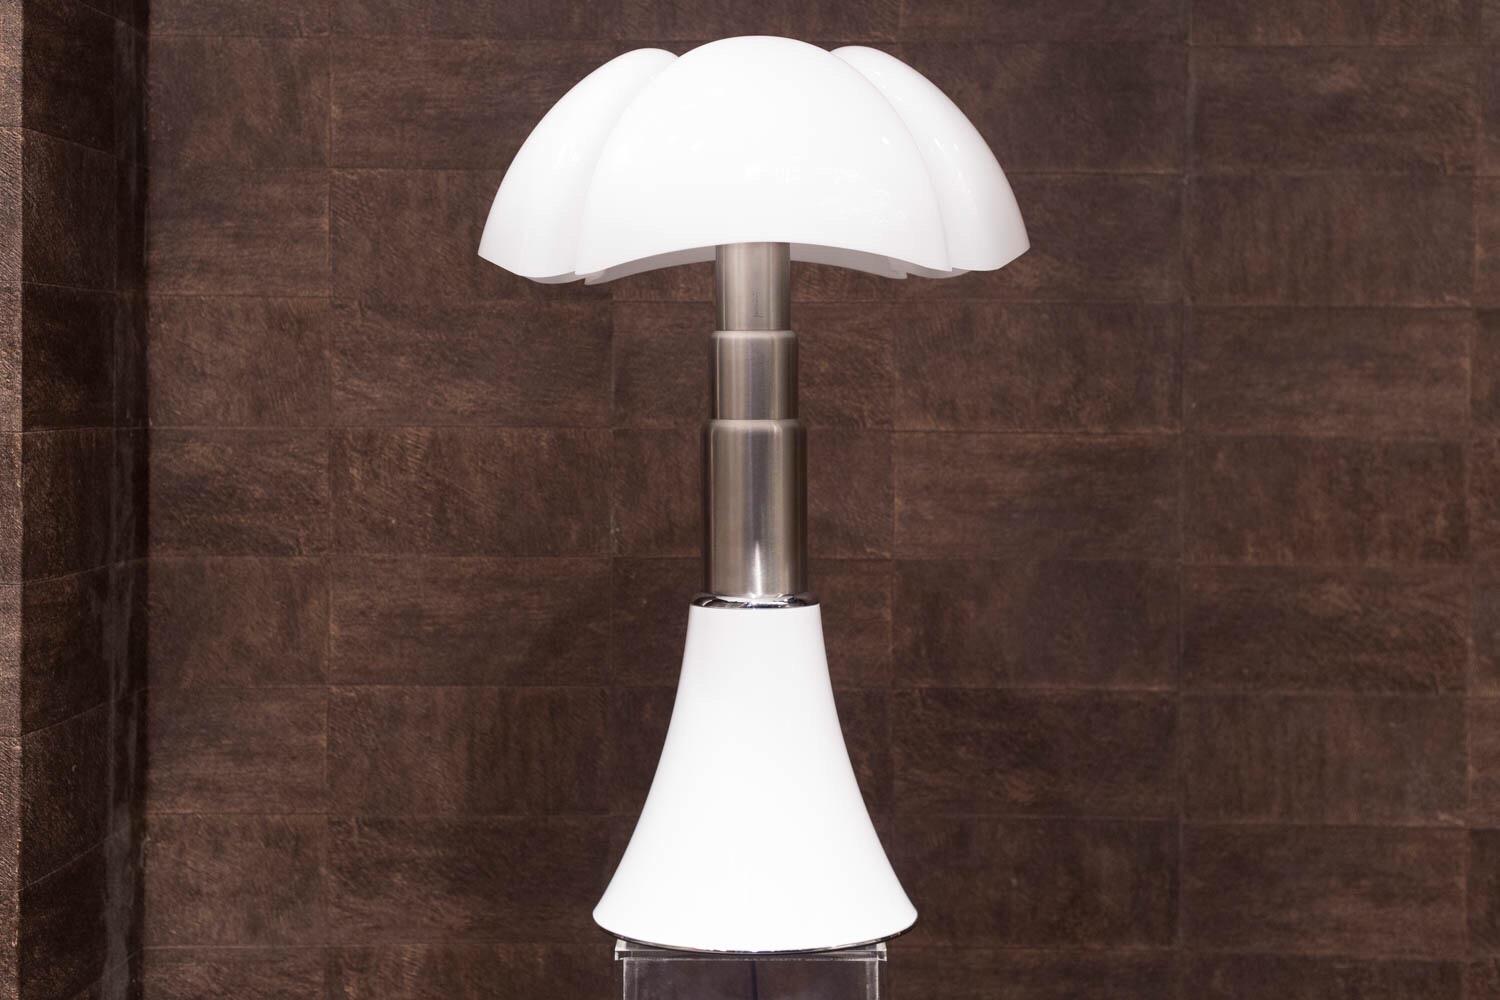 Table lamp or standing lamp with diffused light, adjustable height.
Glazed stainless steel telescope. White opal methacrylate diffuser.
Designed in 1965 by Gae Aulenti for Martinelli Luce. The shape of conic base grows in the height through the